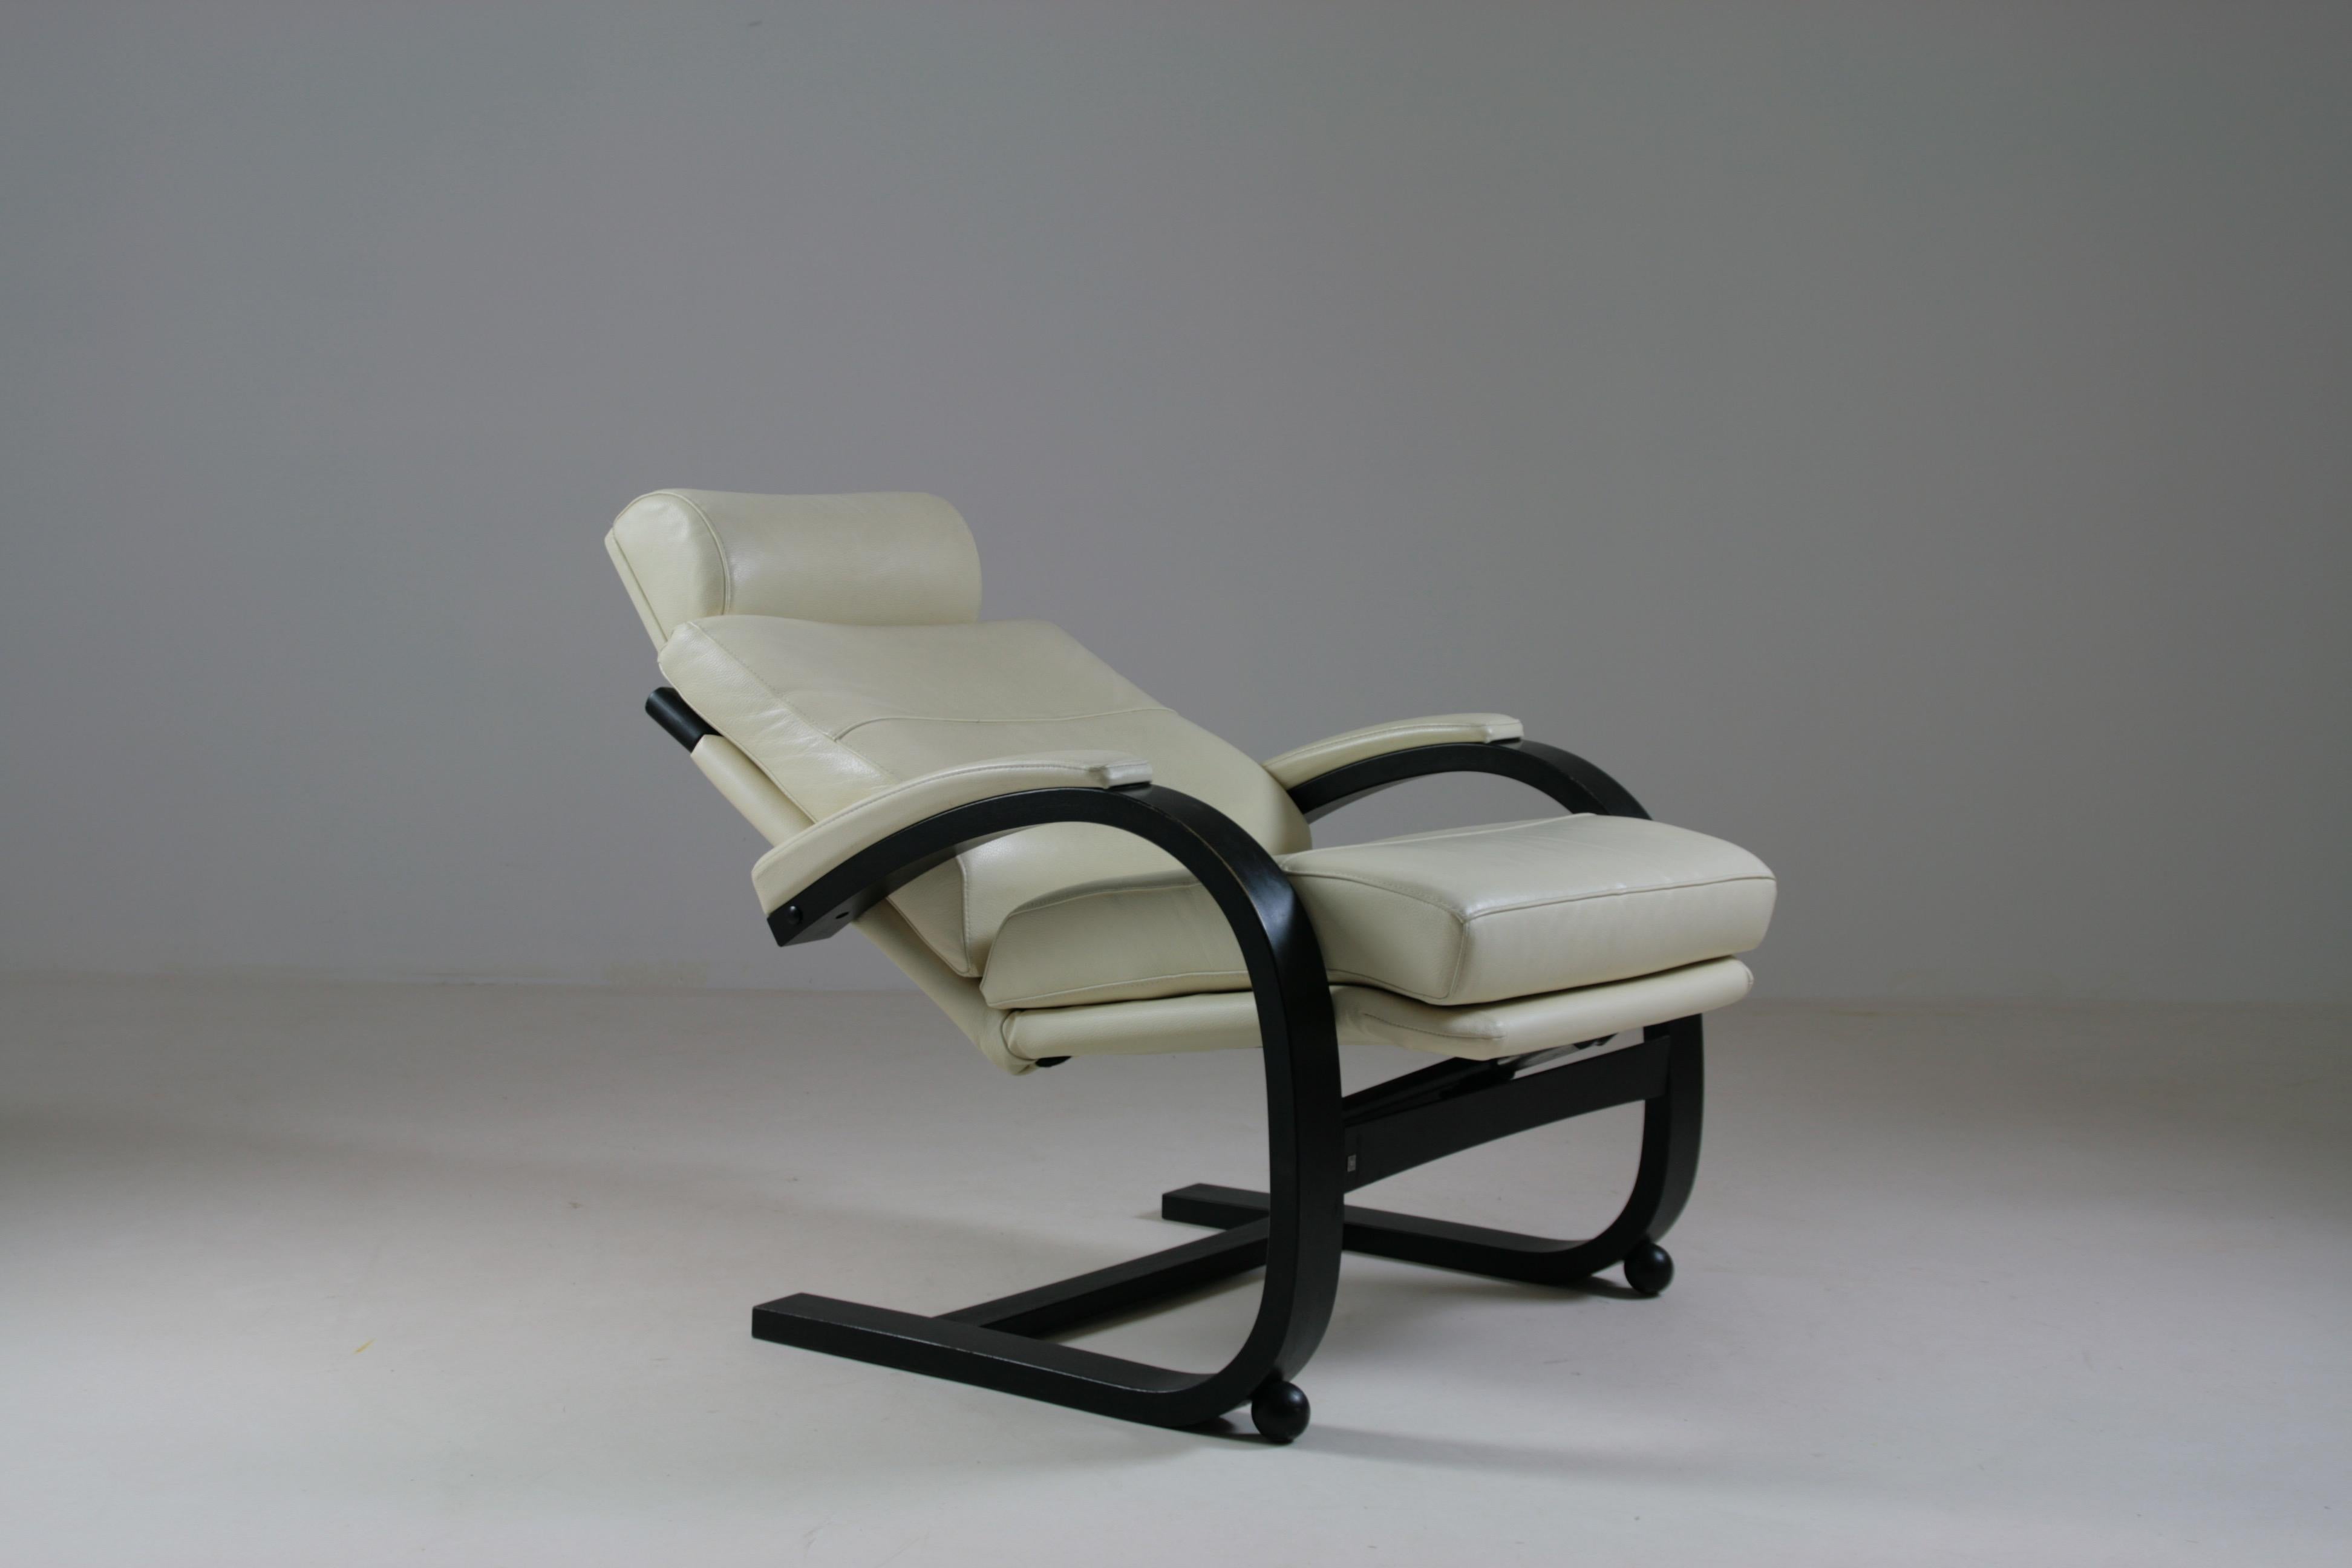 Nelo Swedish leather recliner armchair by åke fribyter For Sale 6